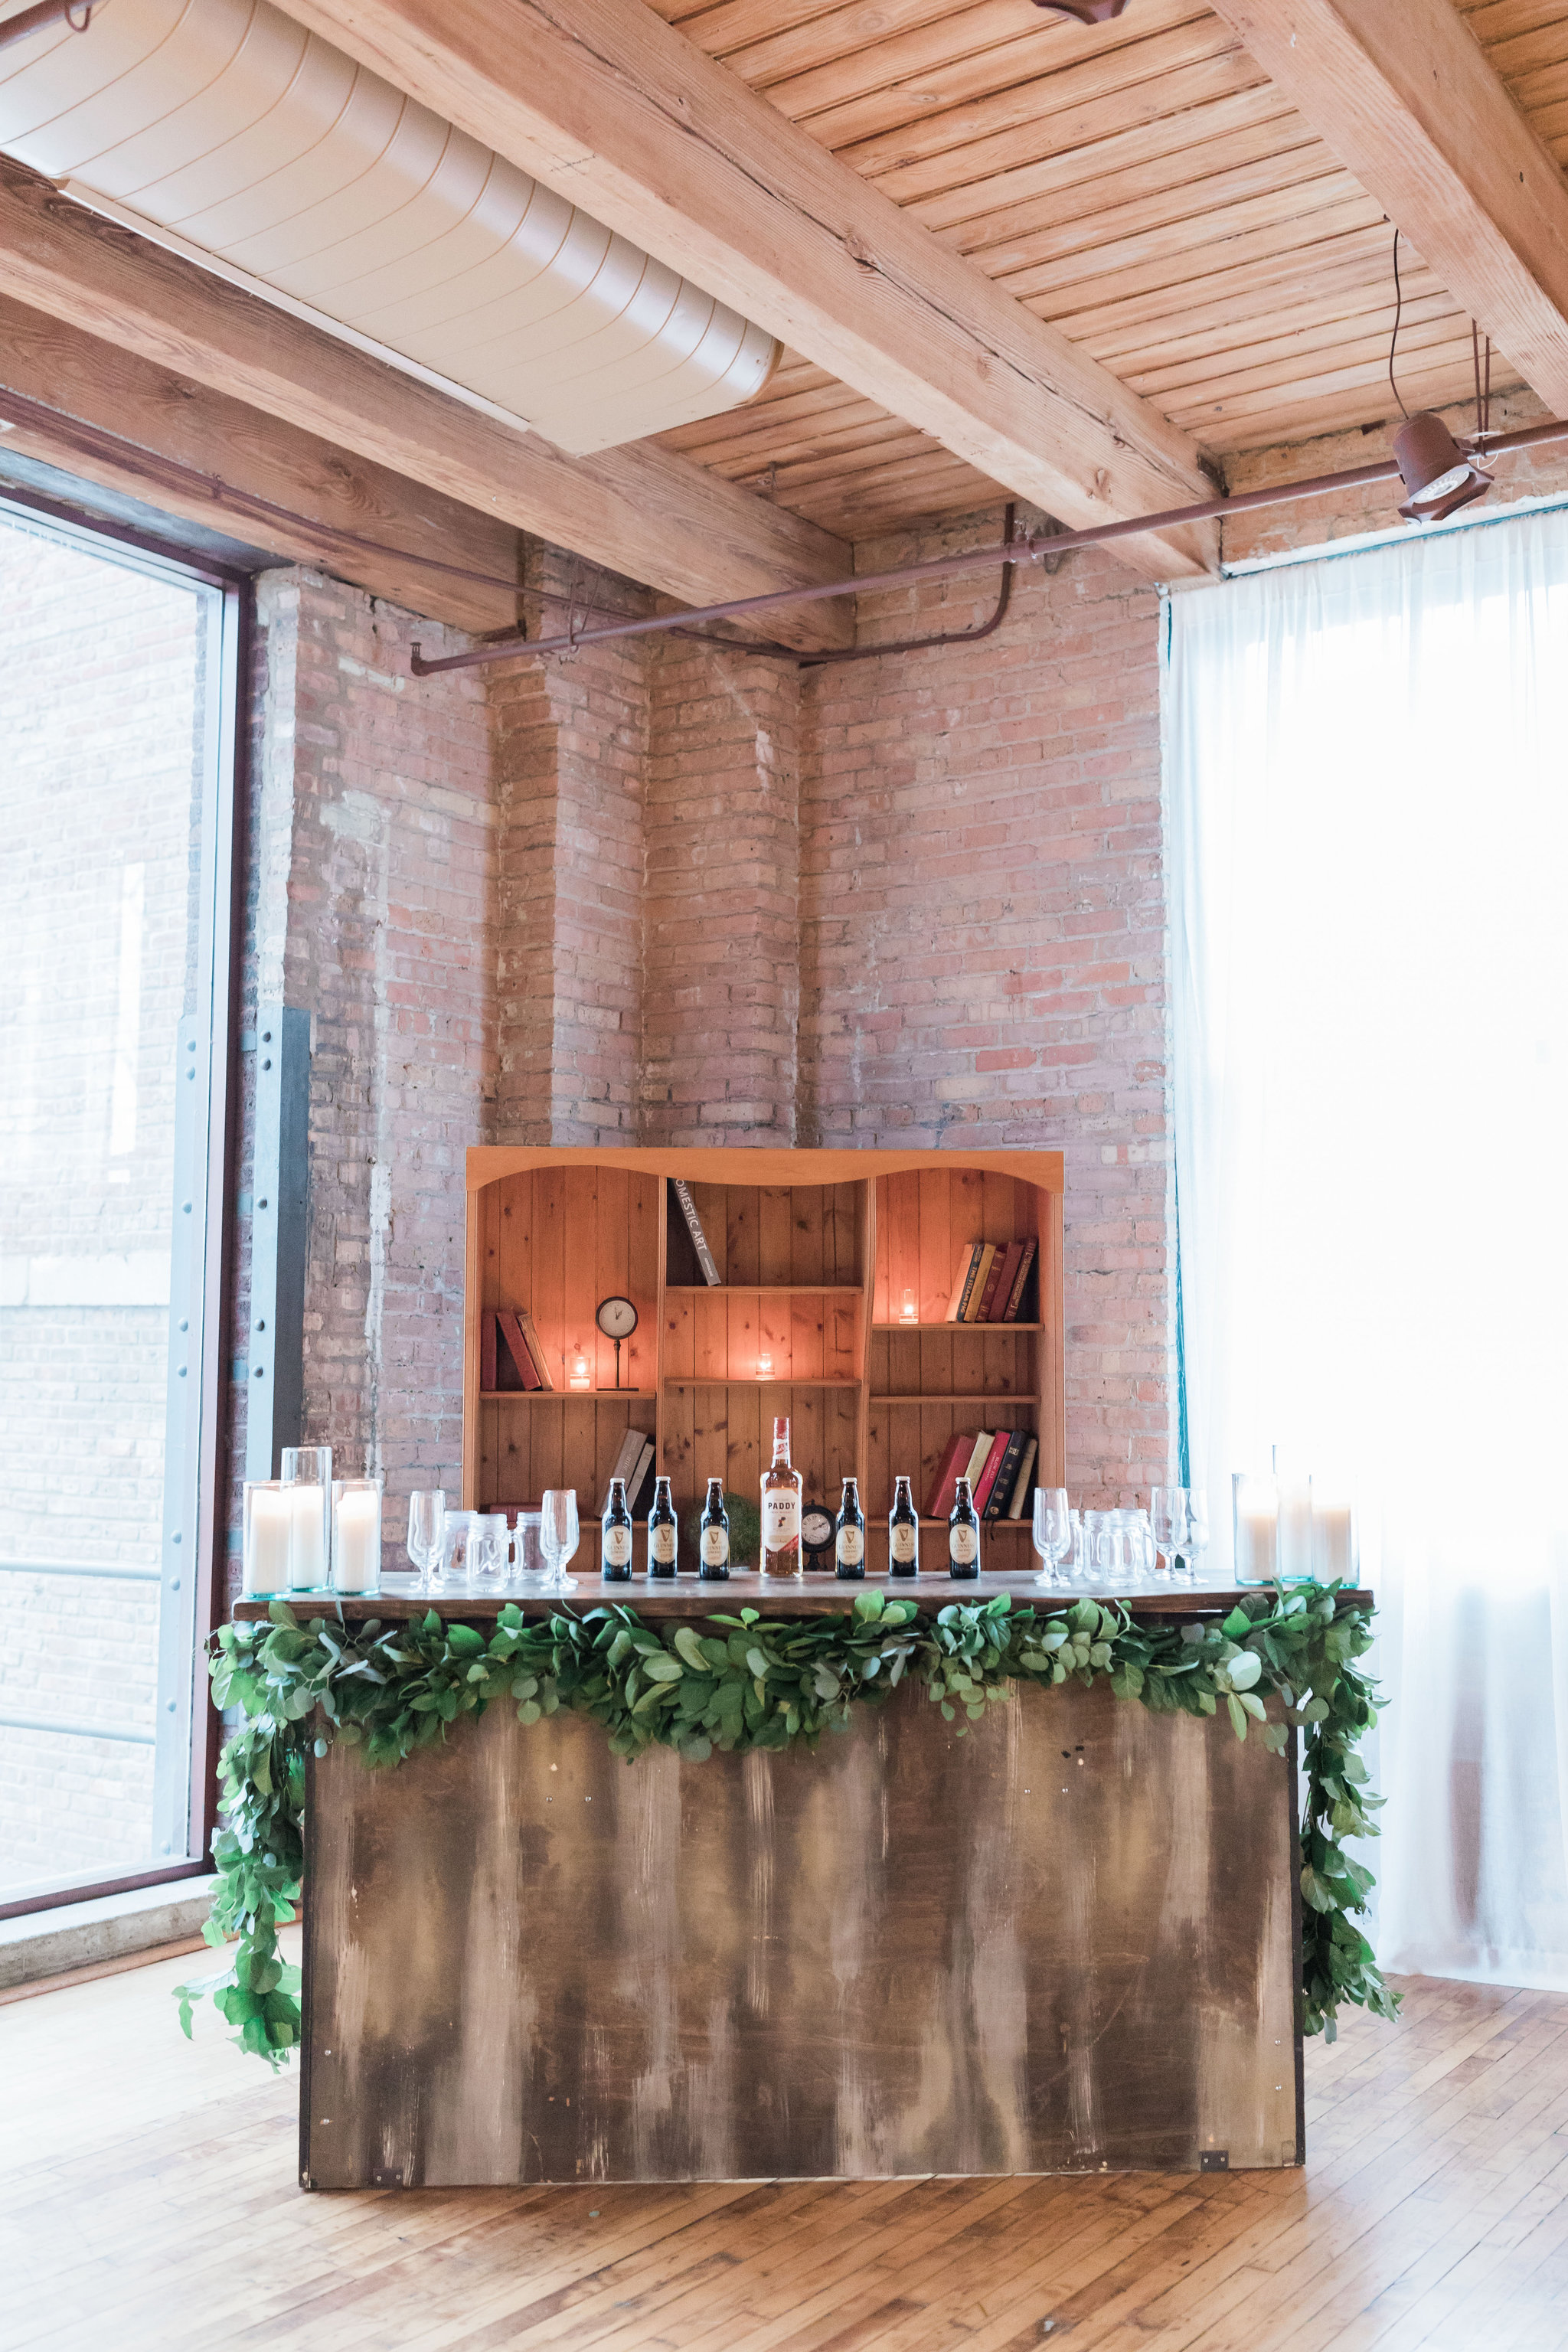 Bar decorated with garland at Bridgeport Art Center in Chicago.